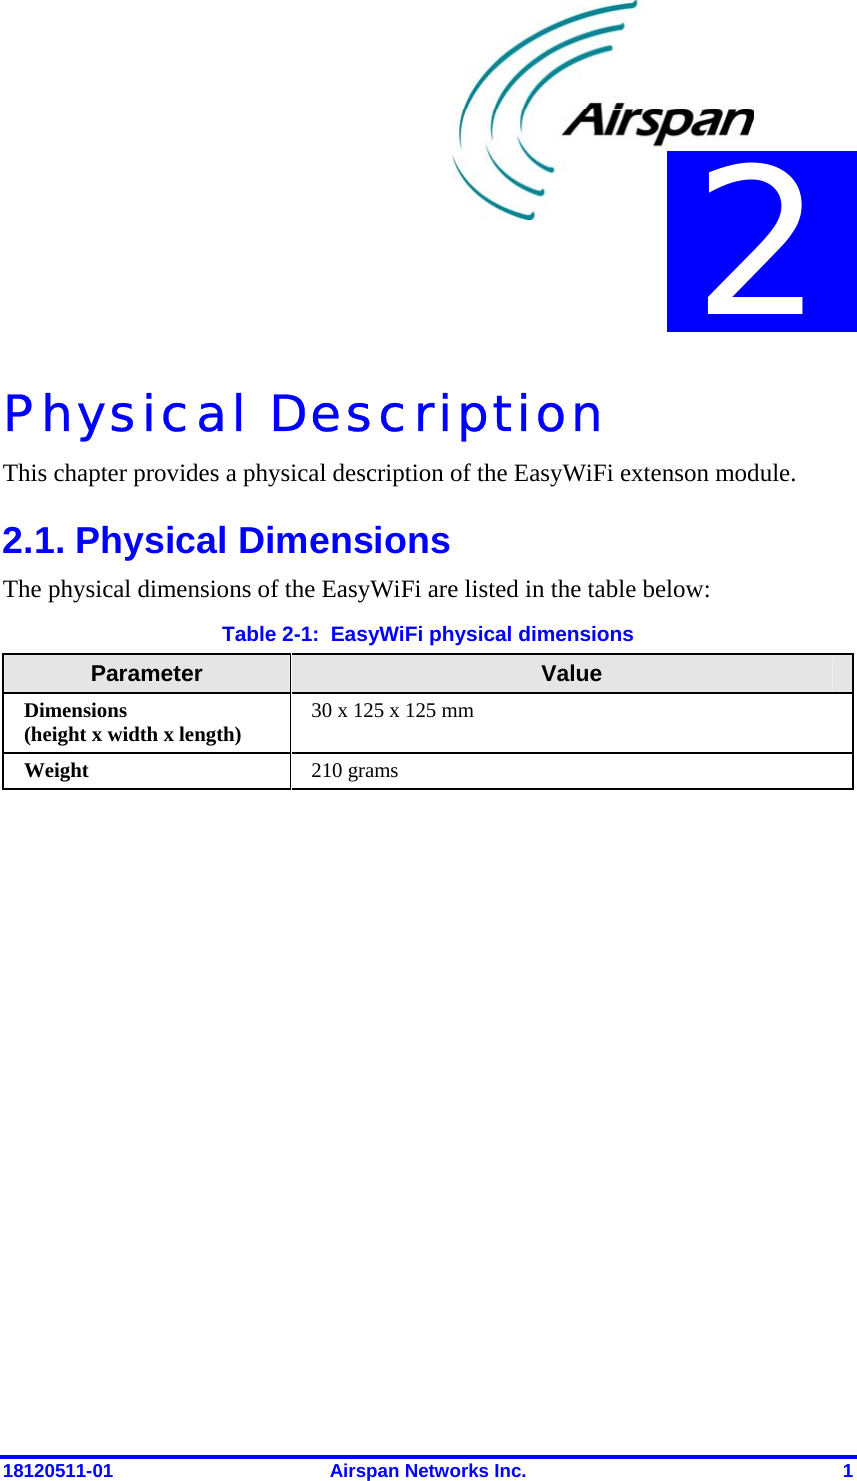  18120511-01  Airspan Networks Inc.  1 Physical Description This chapter provides a physical description of the EasyWiFi extenson module. 2.1. Physical Dimensions The physical dimensions of the EasyWiFi are listed in the table below: Table  2-1:  EasyWiFi physical dimensions Parameter  Value Dimensions  (height x width x length)  30 x 125 x 125 mm Weight  210 grams  2 